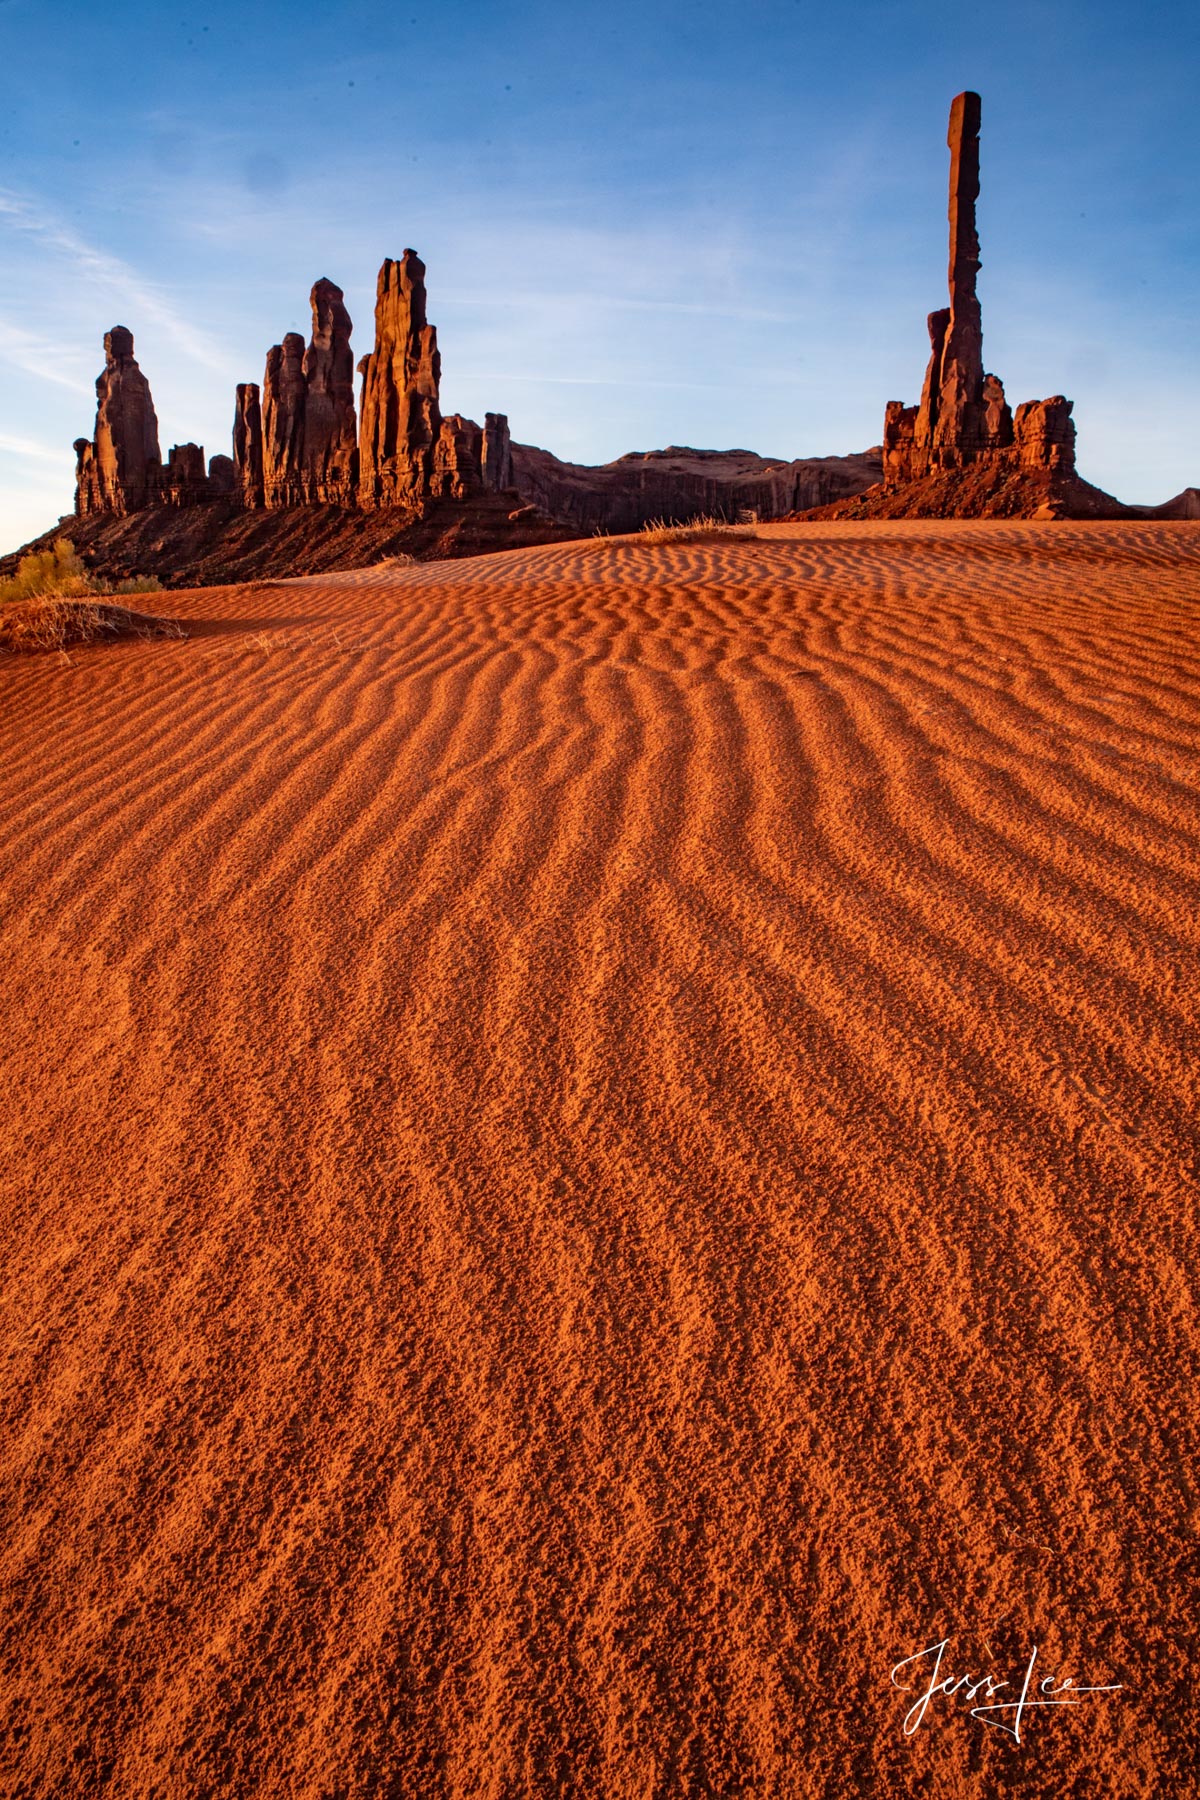 Limited Edition of 50 Exclusive high-resolution Museum Quality Fine Art Prints of Vertical Landscapes of the Red Dunes of Monument...